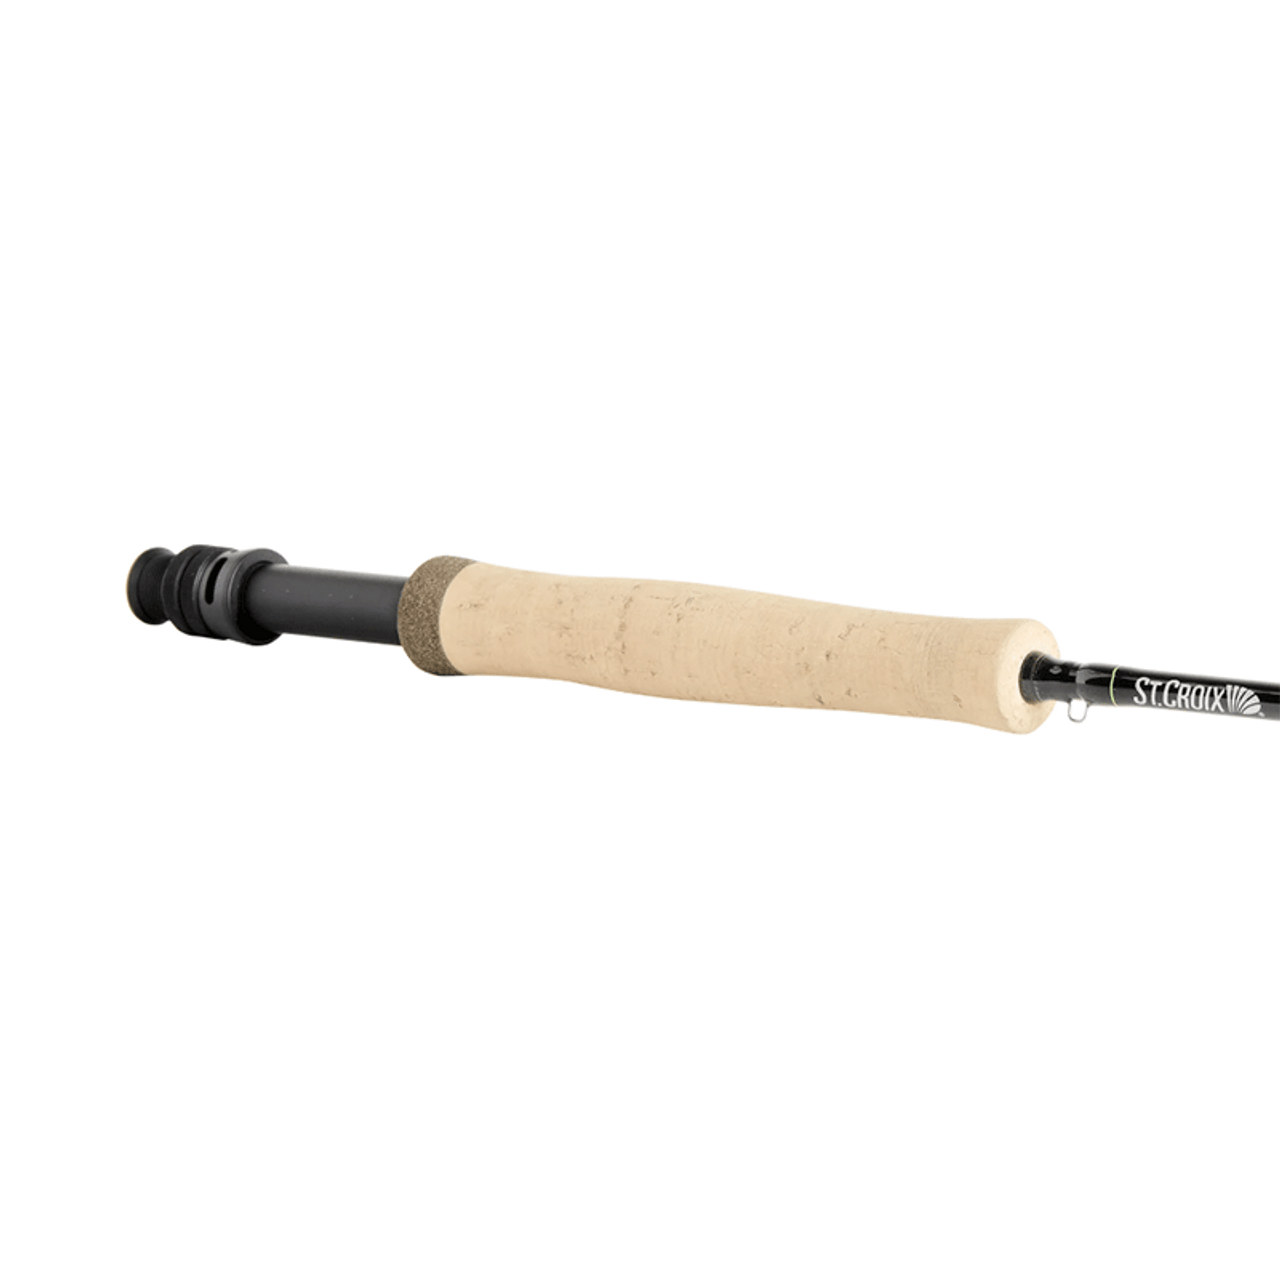 Connect 480-4 Medium Fast 8' Fly Fishing Rod - Handle